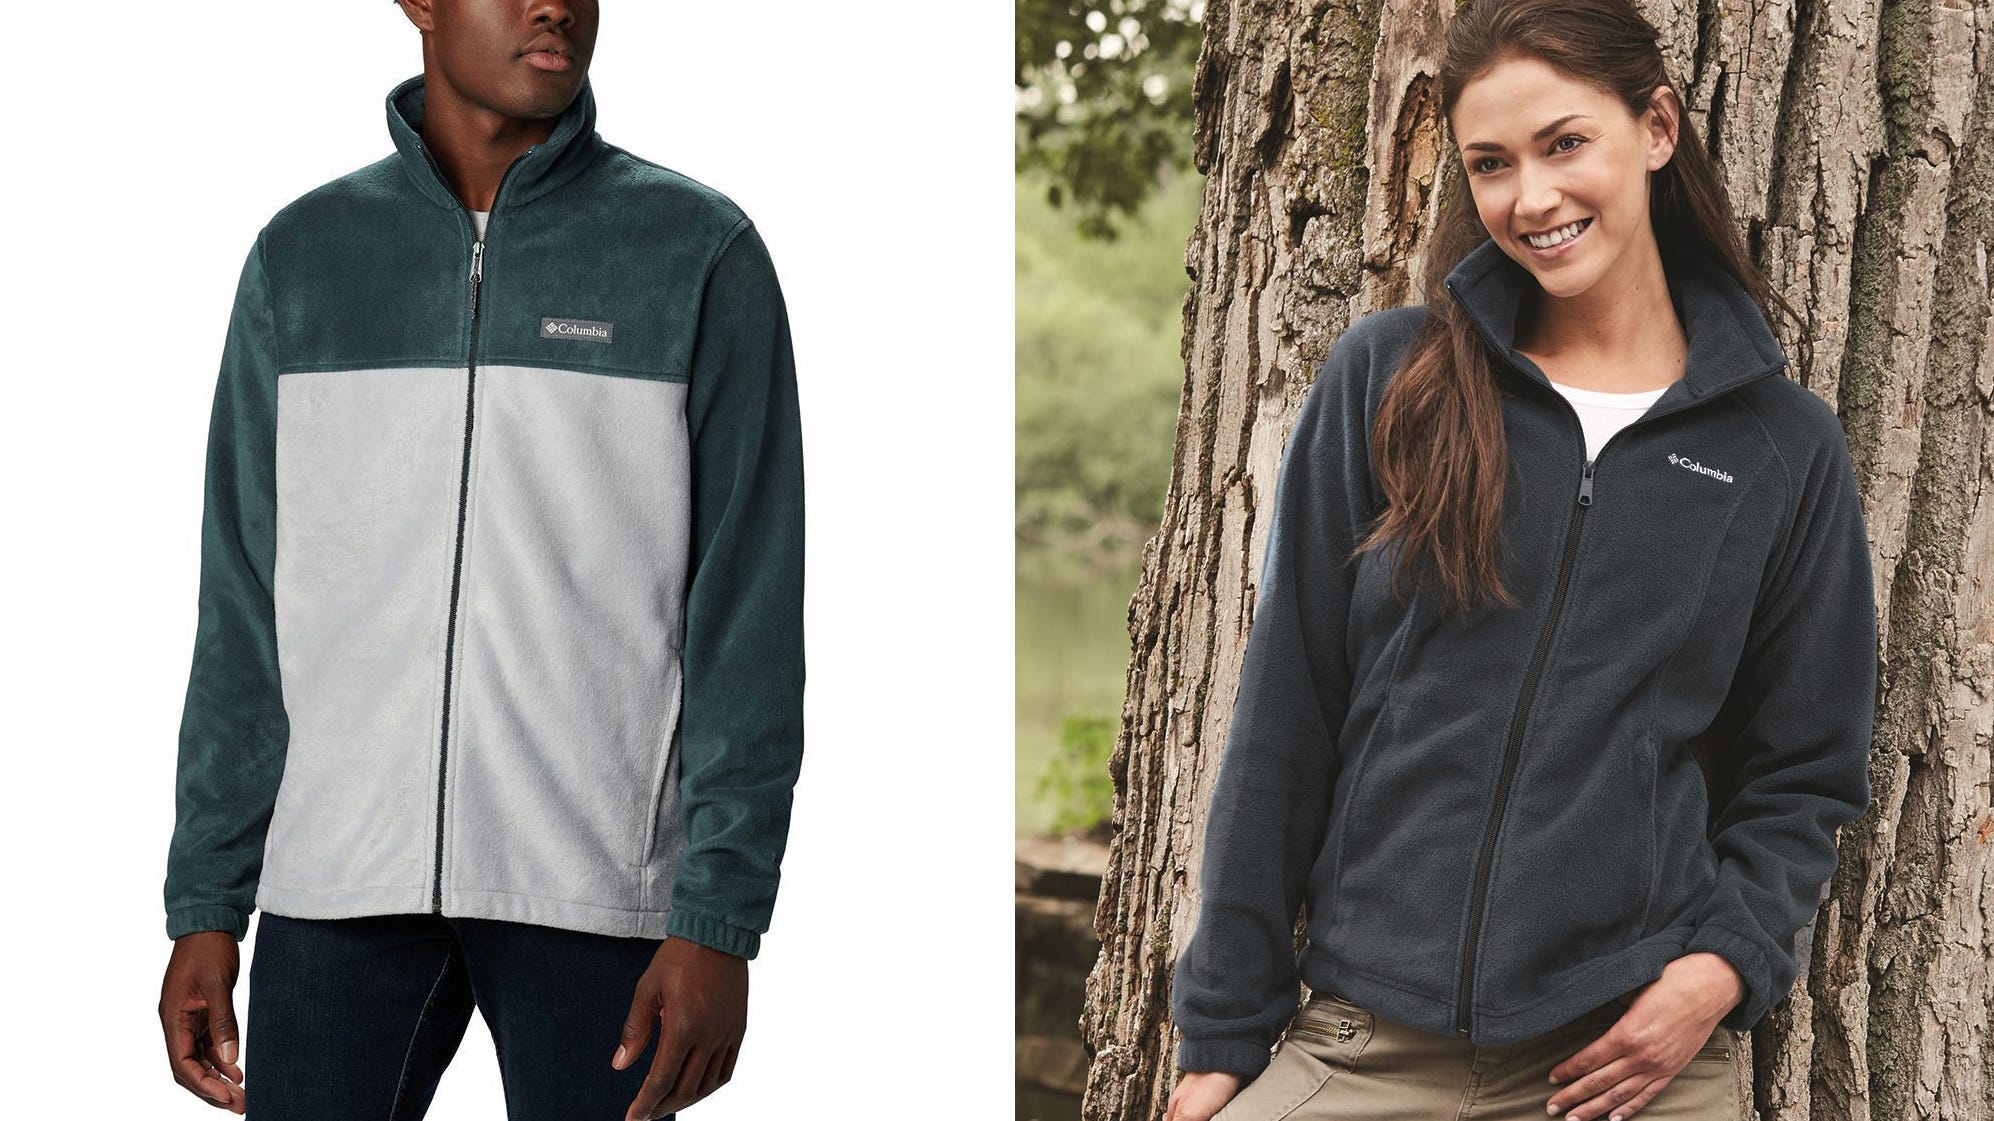 Columbia Sportswear Company Save On Jackets Shoes And Outdoor Gear From This Top Rated Brand